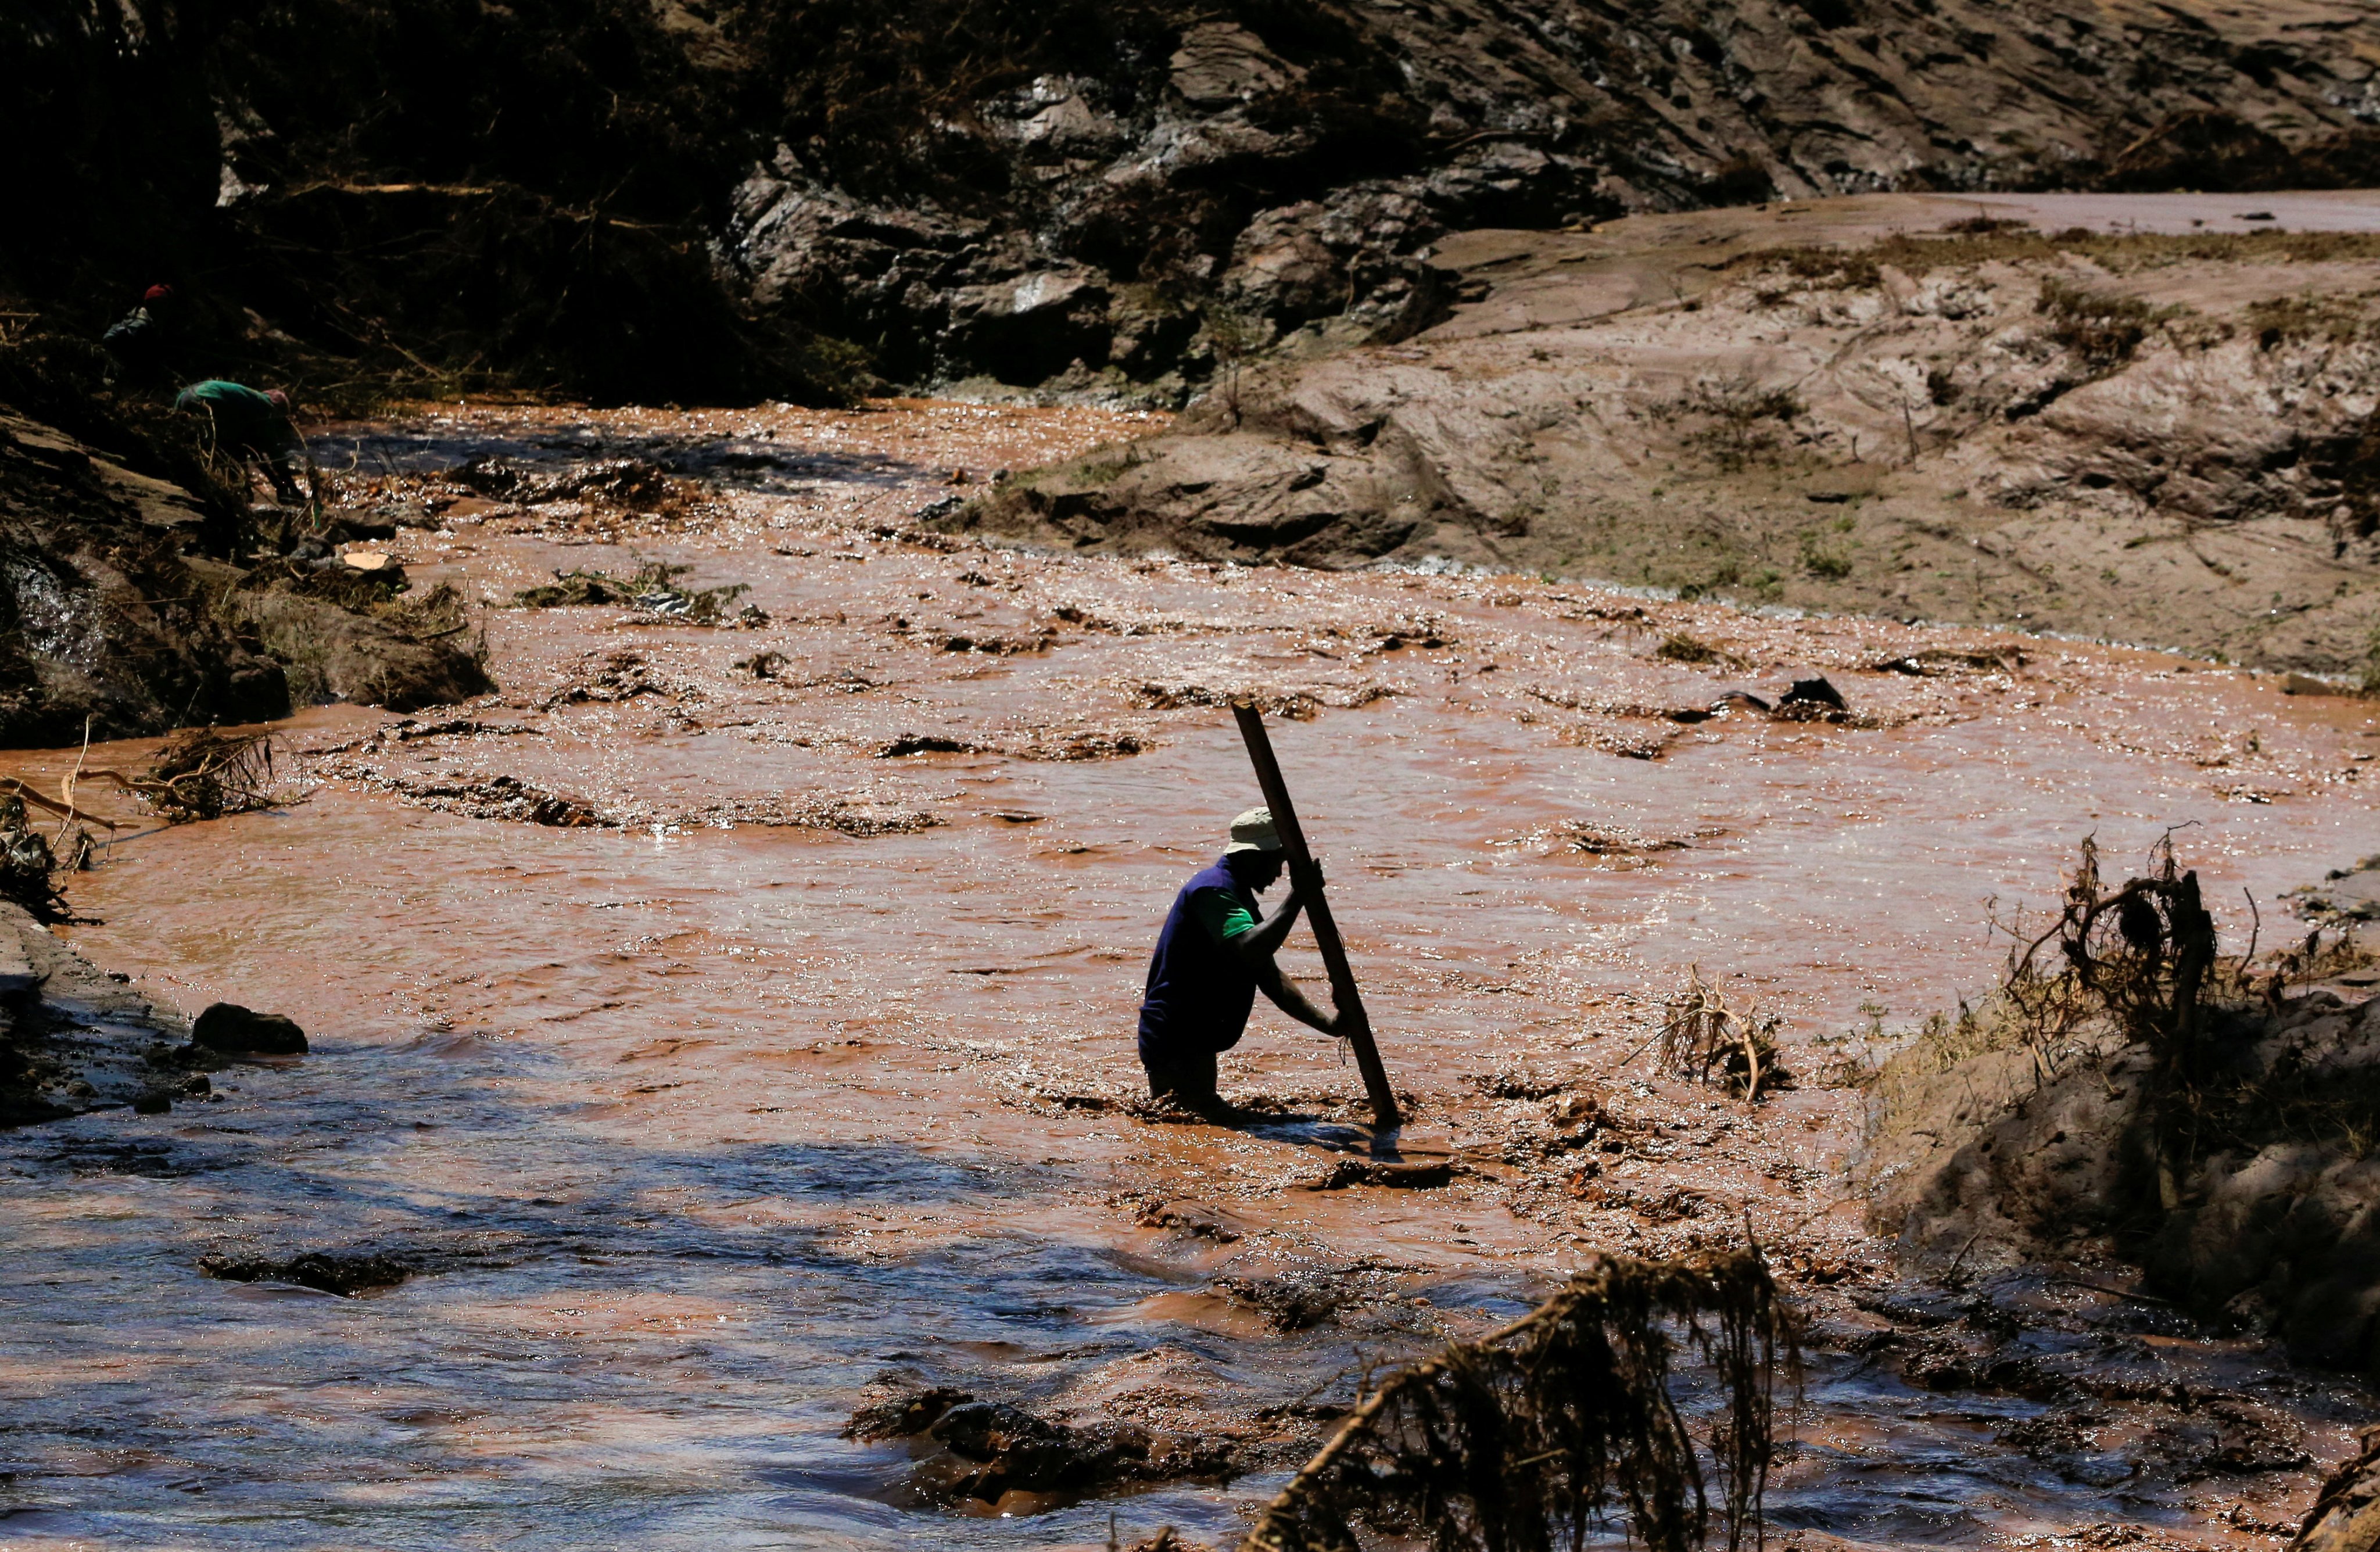 A man uses a stick to cross a river after heavy flash floods wiped out several homes when a dam burst, following heavy rains in Kenya on Monday. Photo: Reuters